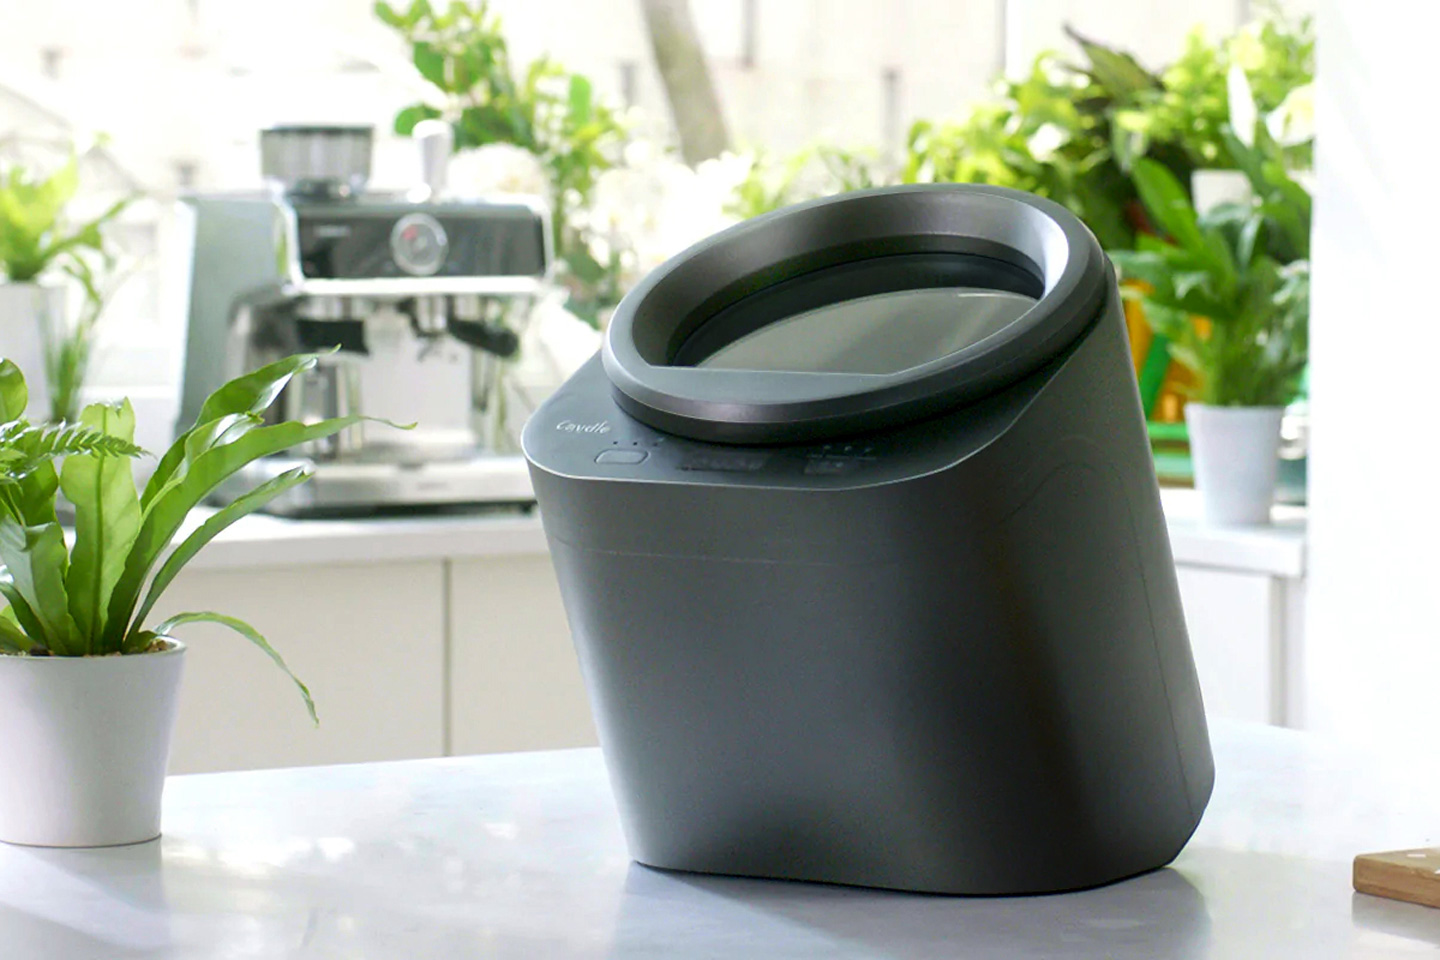 #Elegant tabletop waste disposal system turns all your food-waste into nutrient-rich compost